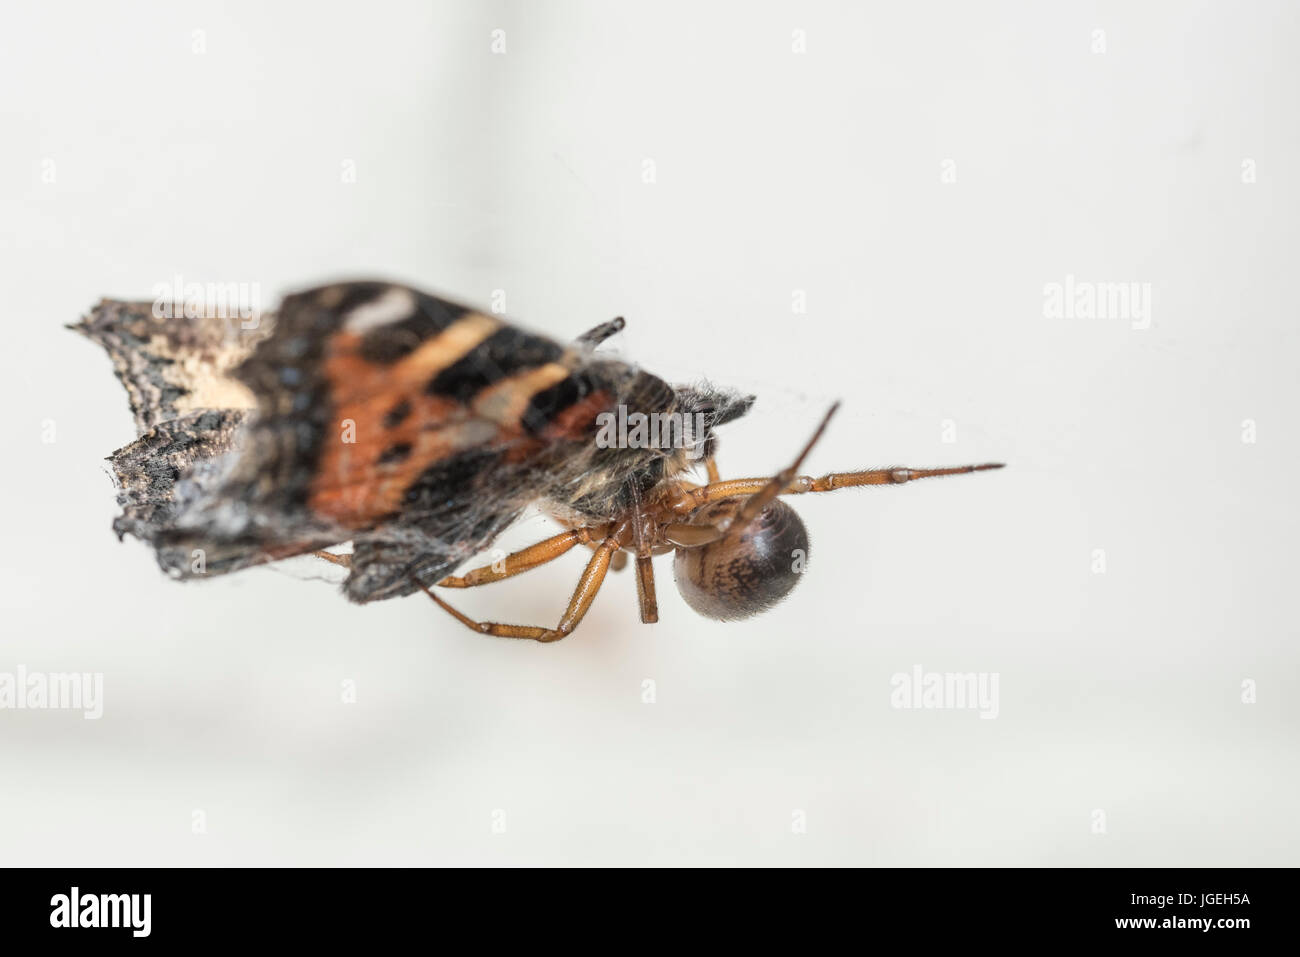 A False Widow spider (Steotoda possibly nobilis) with a captured Small Tortoiseshell butterfly Stock Photo